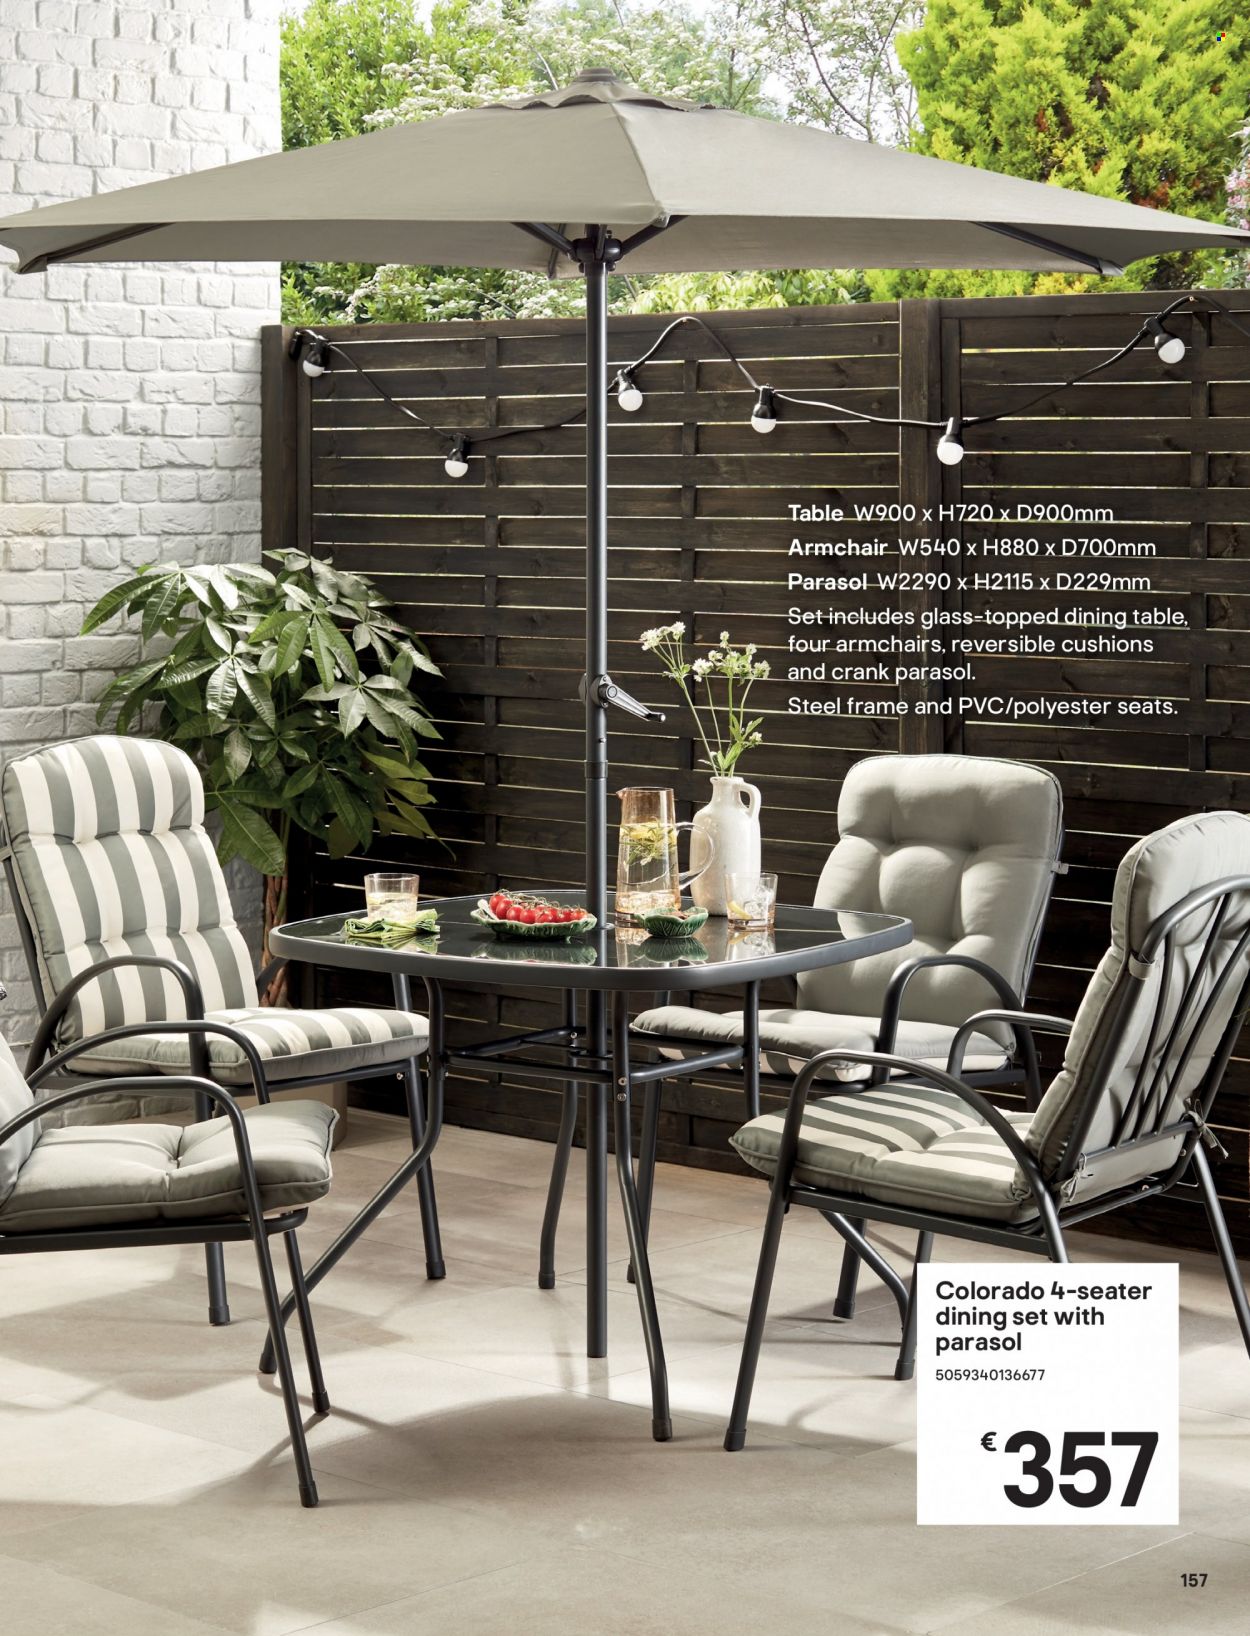 B&Q offer  - Sales products - dining set, dining table, table, arm chair, cushion. Page 157.